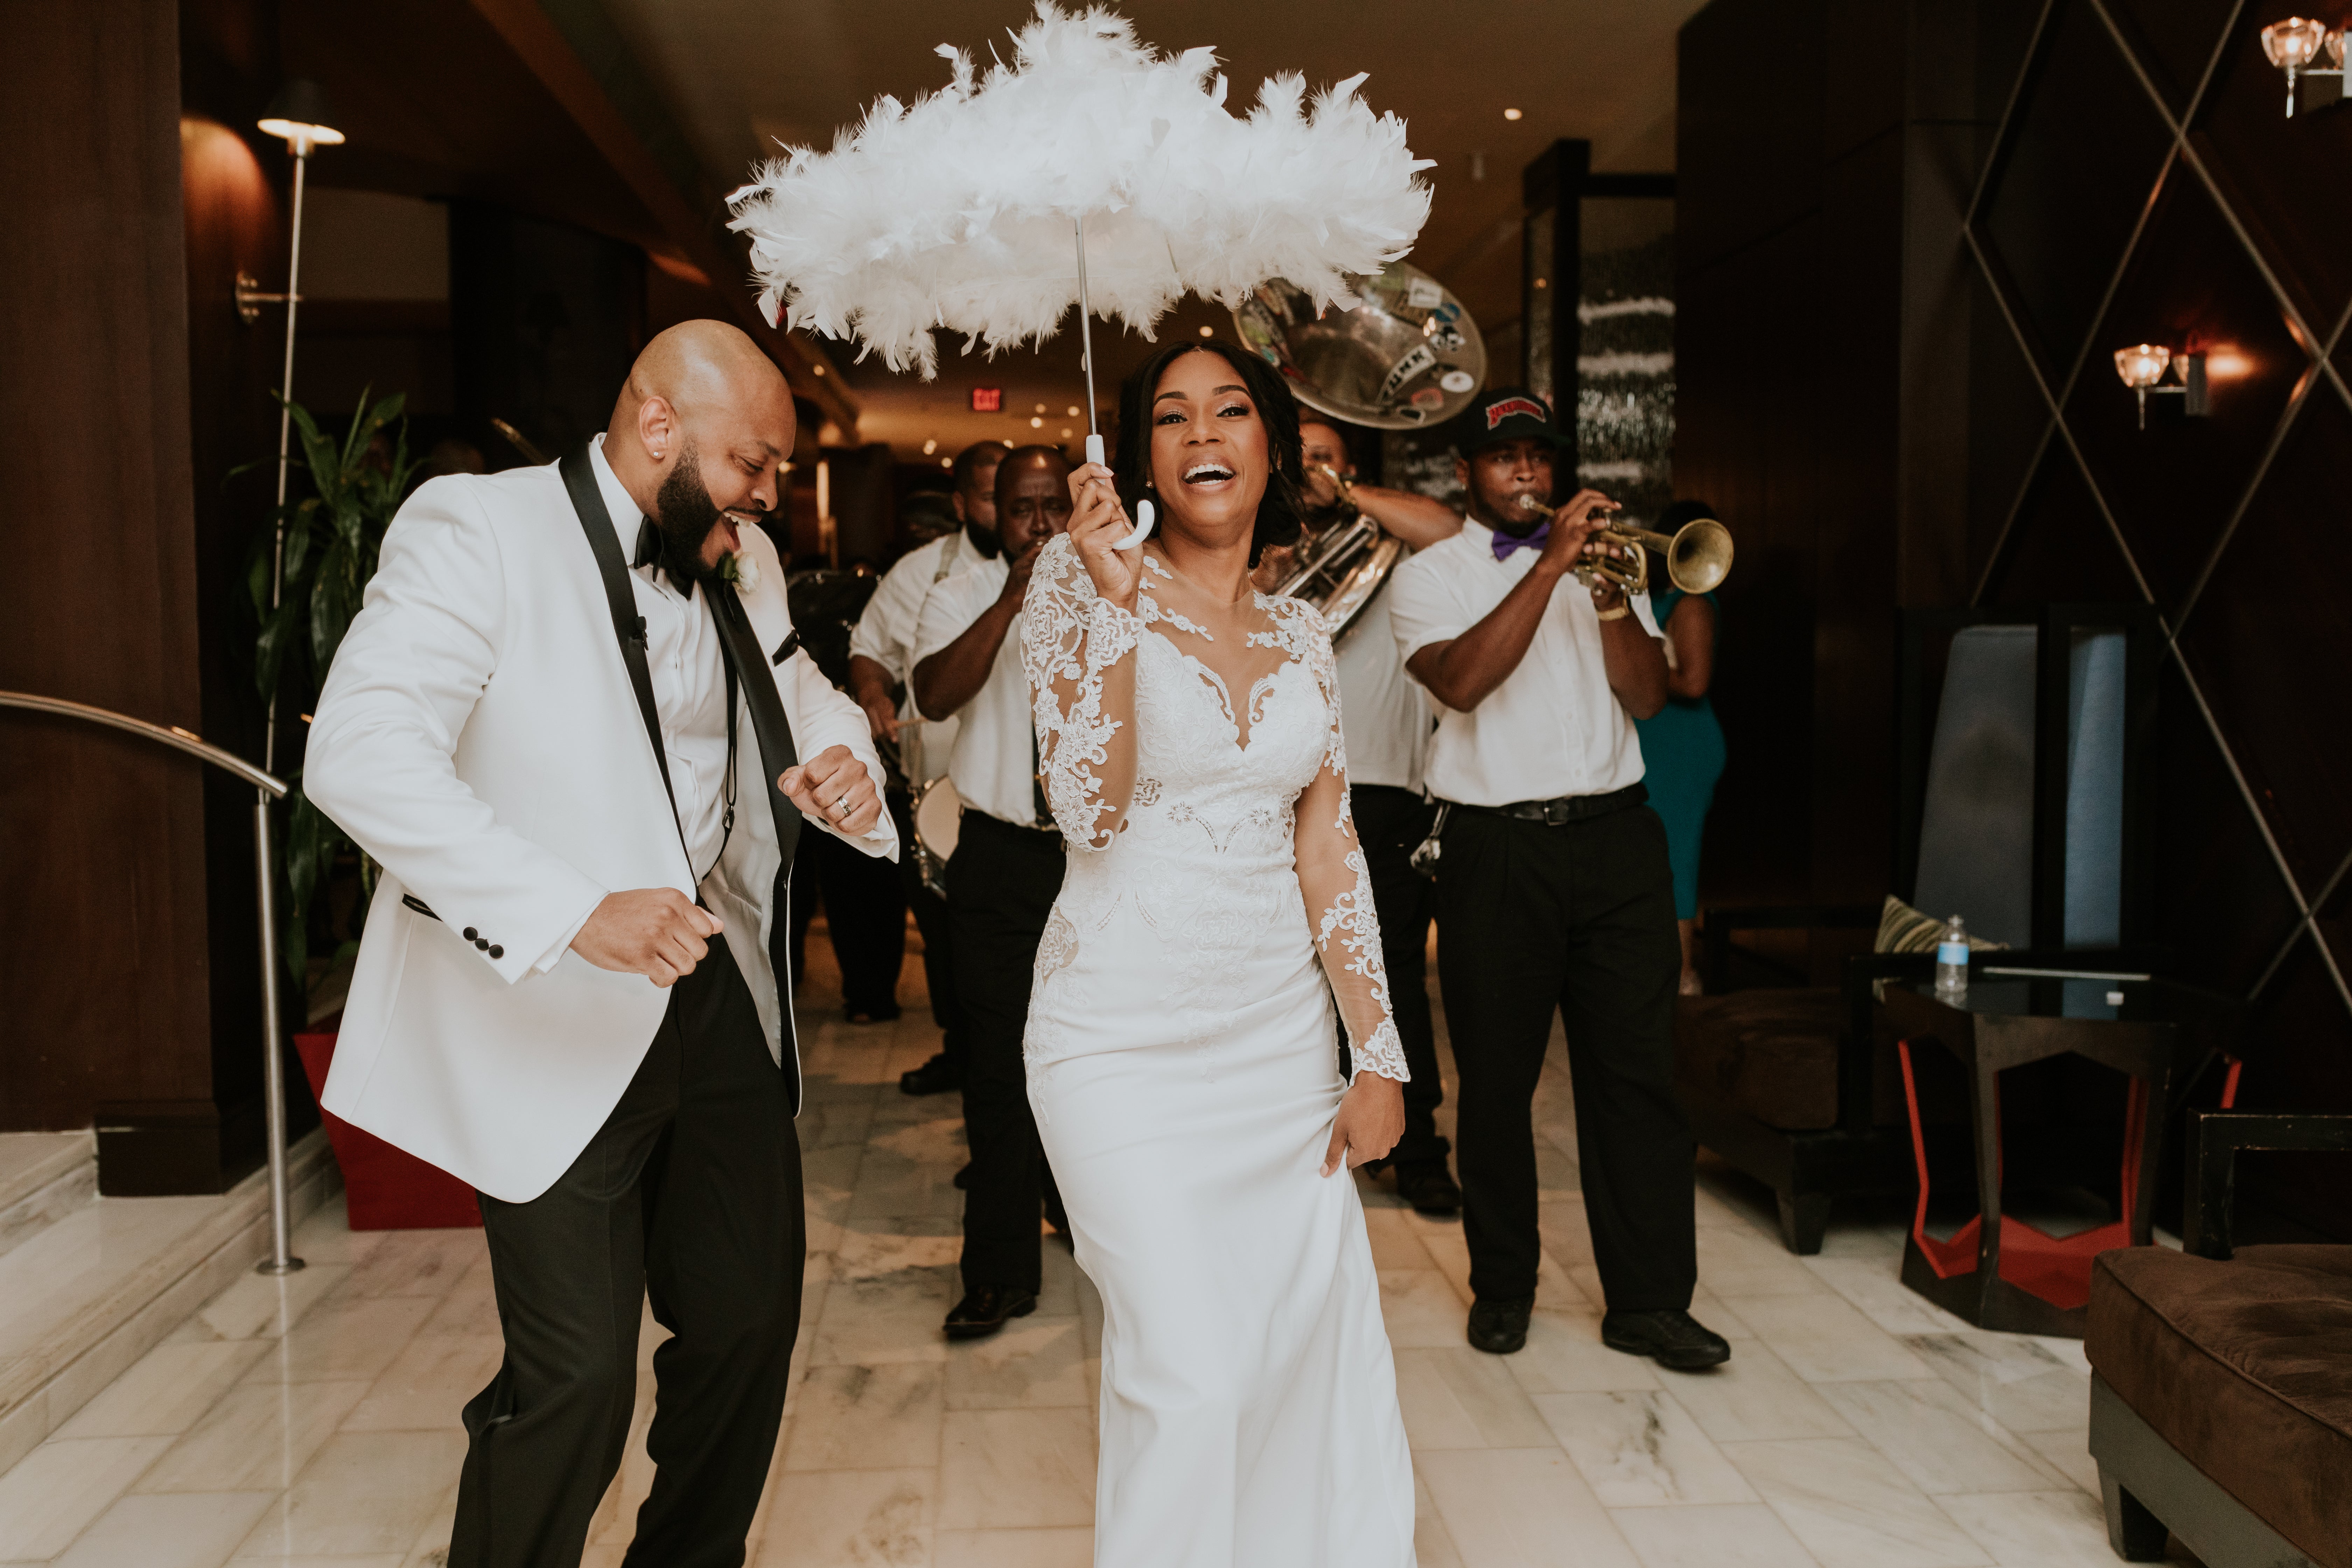 Bridal Bliss: Terrel And Jennifer's New Orleans Wedding Was White-Hot!